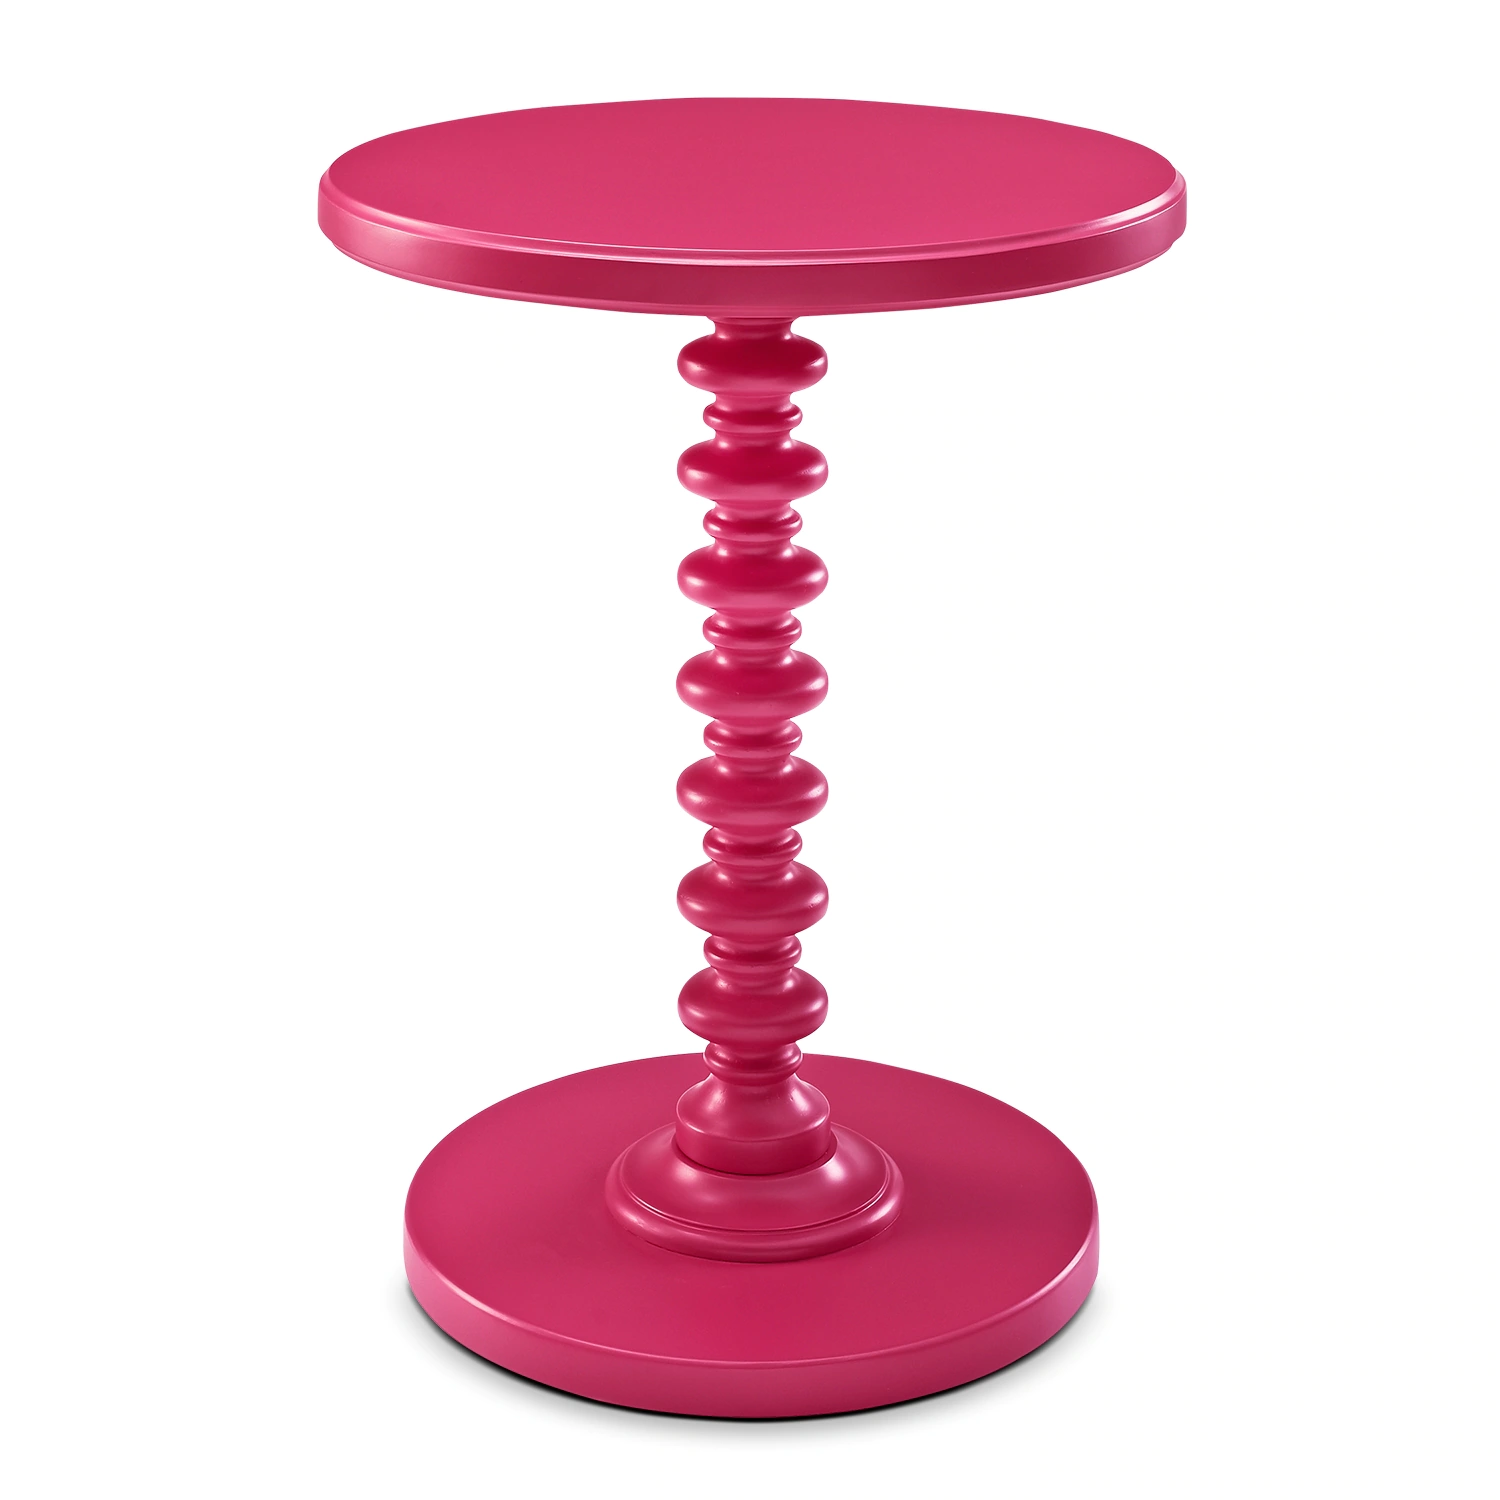 kobi accent table pink american signature furniture metal click change blue lamp shade meyda lighting monarch hall console cappuccino black cube side giant wall clock gloss coffee